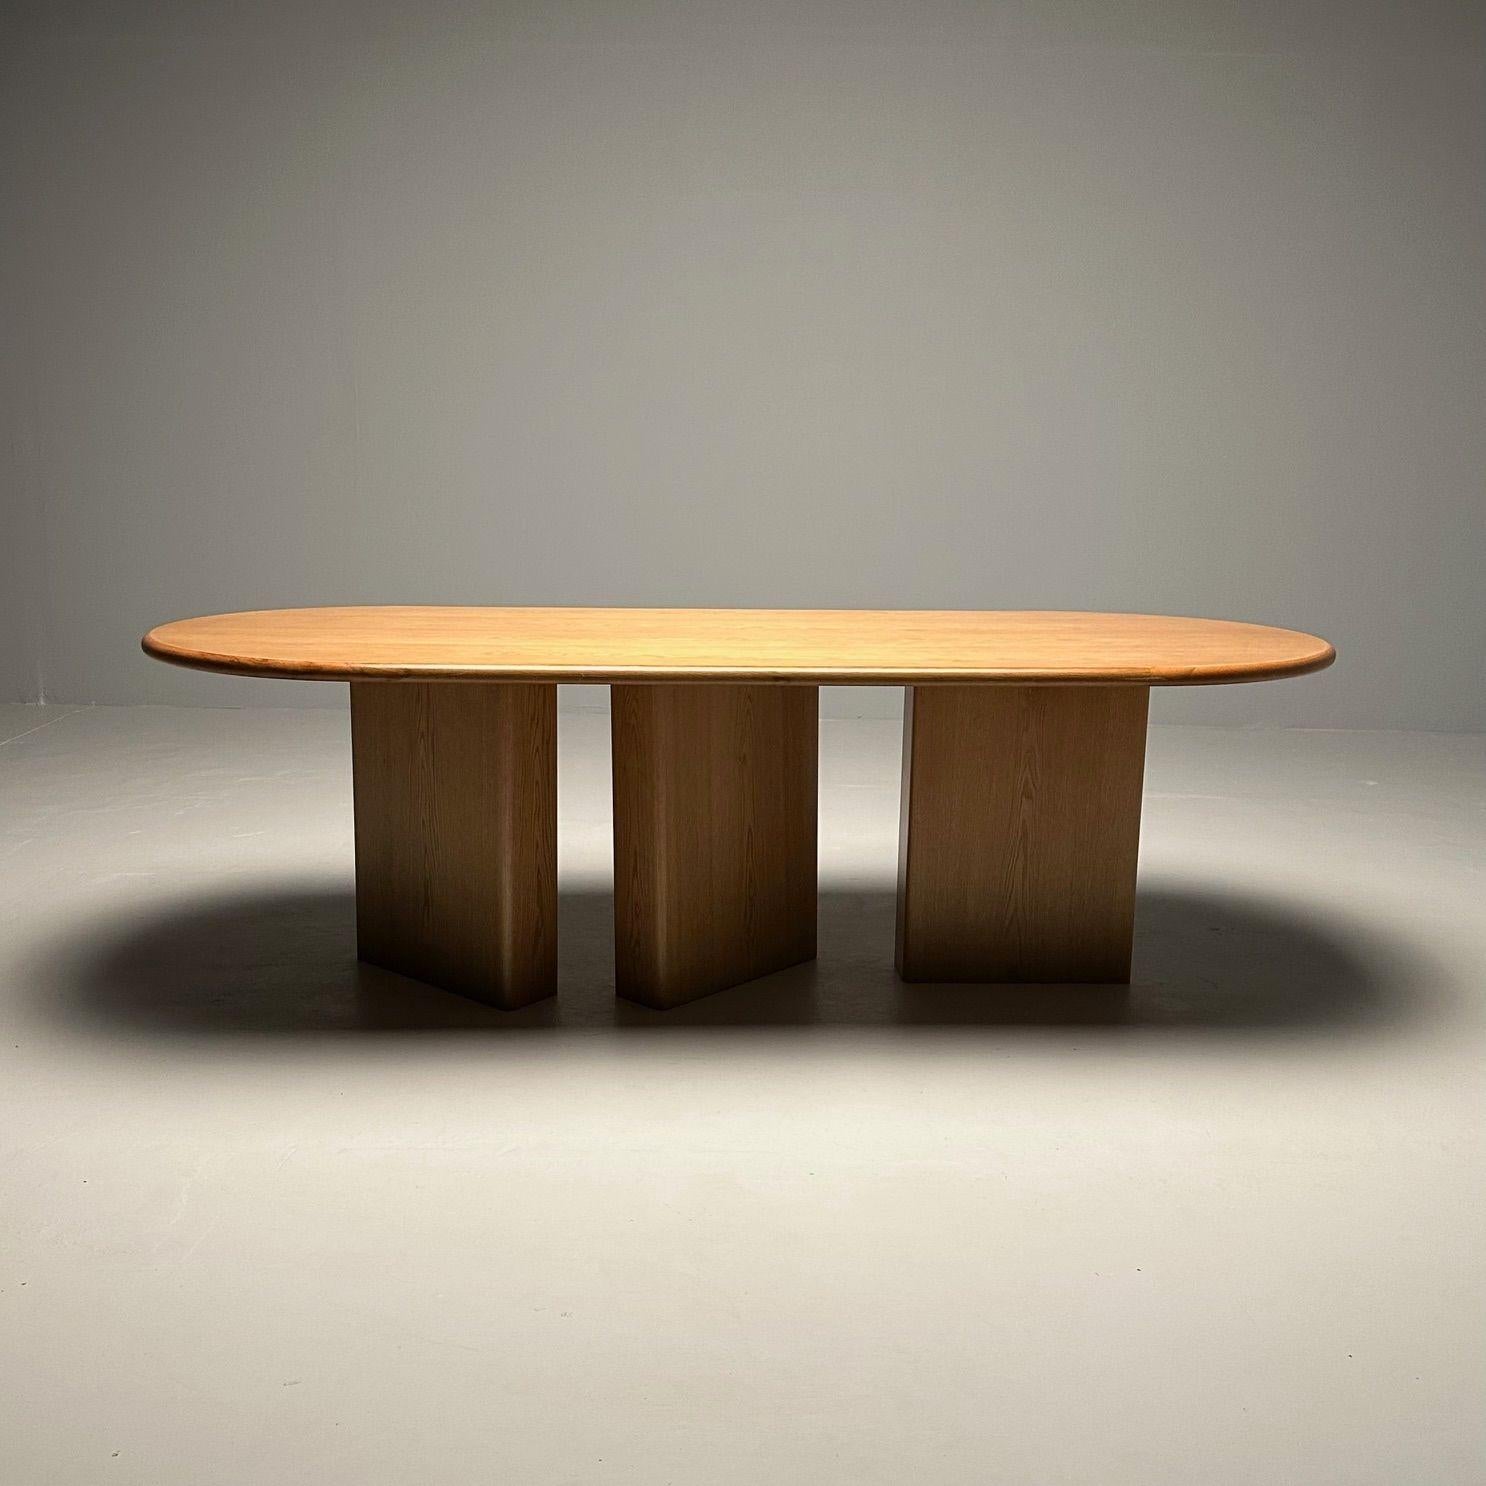 Contemporary Handcrafted Oval Dining Table, Solid Oak, Modern Pedestal Base

Modern oval and narrow dining or kitchen table in solid stained oak wood. The rounded and stained solid oak table top sits on three playfully arranged solid wooden pedestal